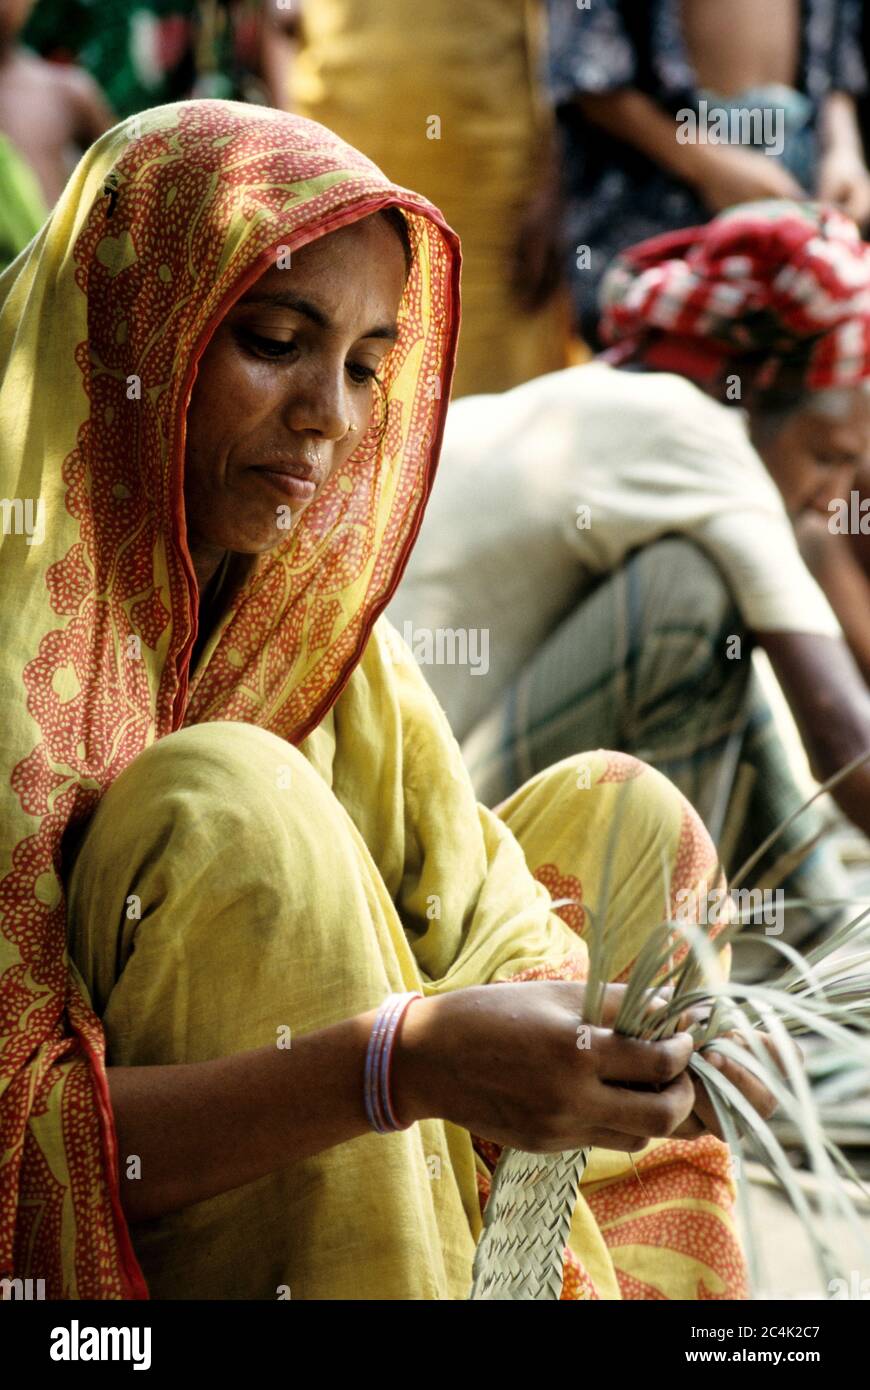 A woman works with the stems of some palm or coconut leaves used in weaving  to make some wonderful handicrafts or household items. Bangladesh Stock  Photo - Alamy